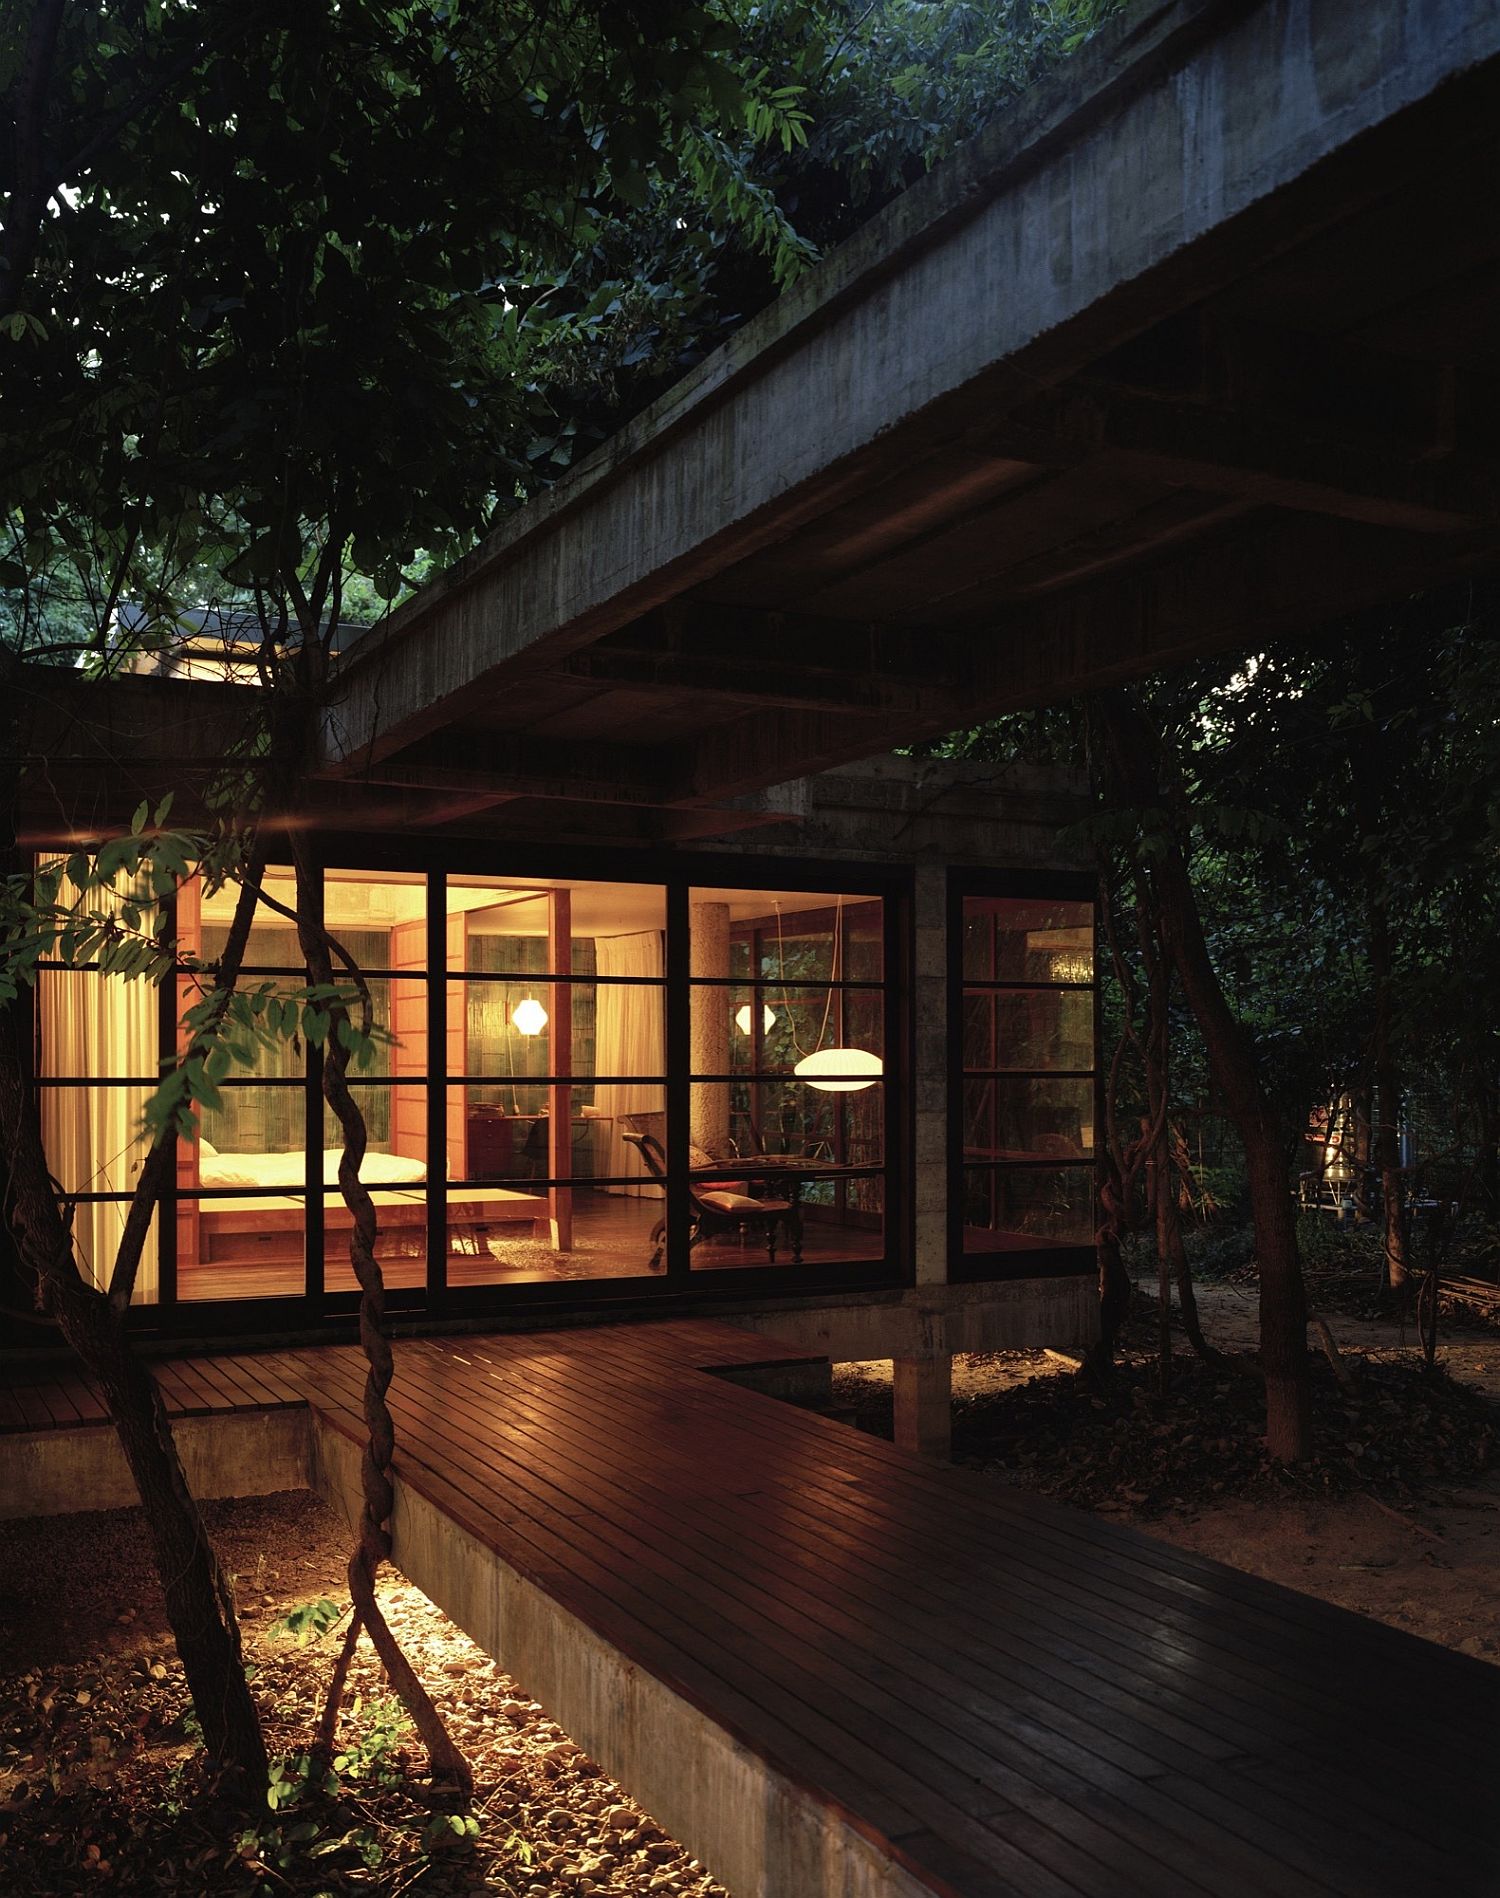 An elevated deck and covered walkways connect different rooms of the house